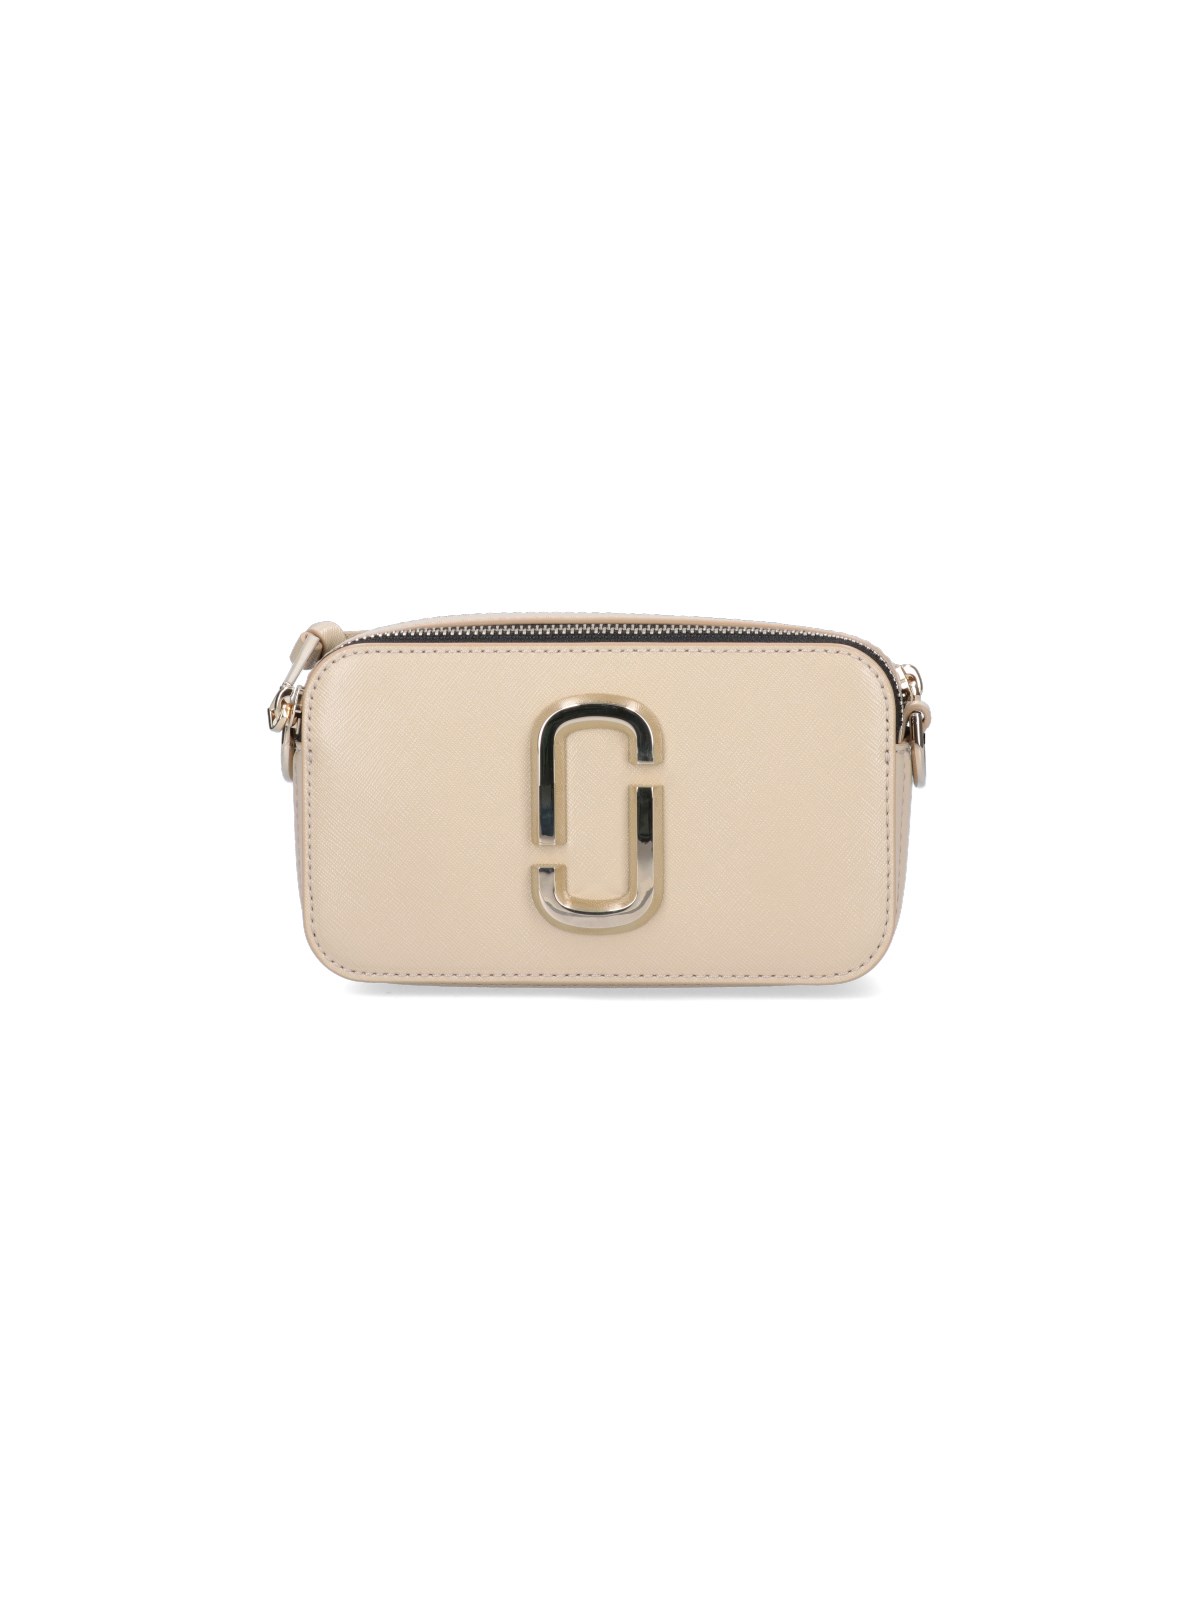 MARC JACOBS The Snapshot DTM leather bag